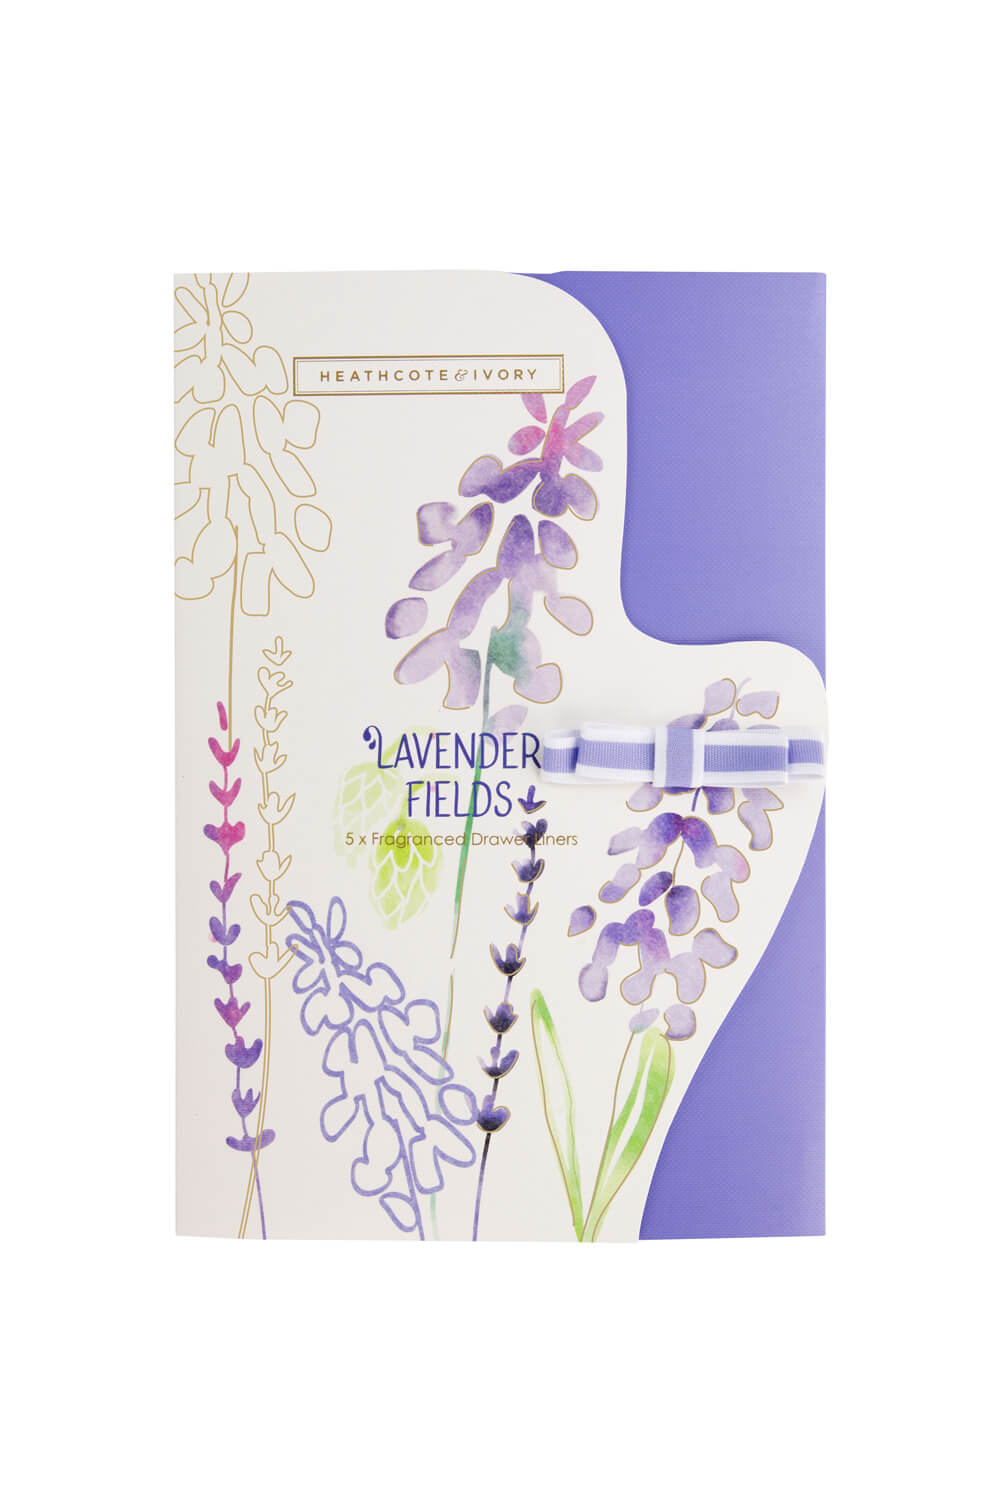 Heathcote & Ivory - Lavender Fields Fragranced Drawer Liners